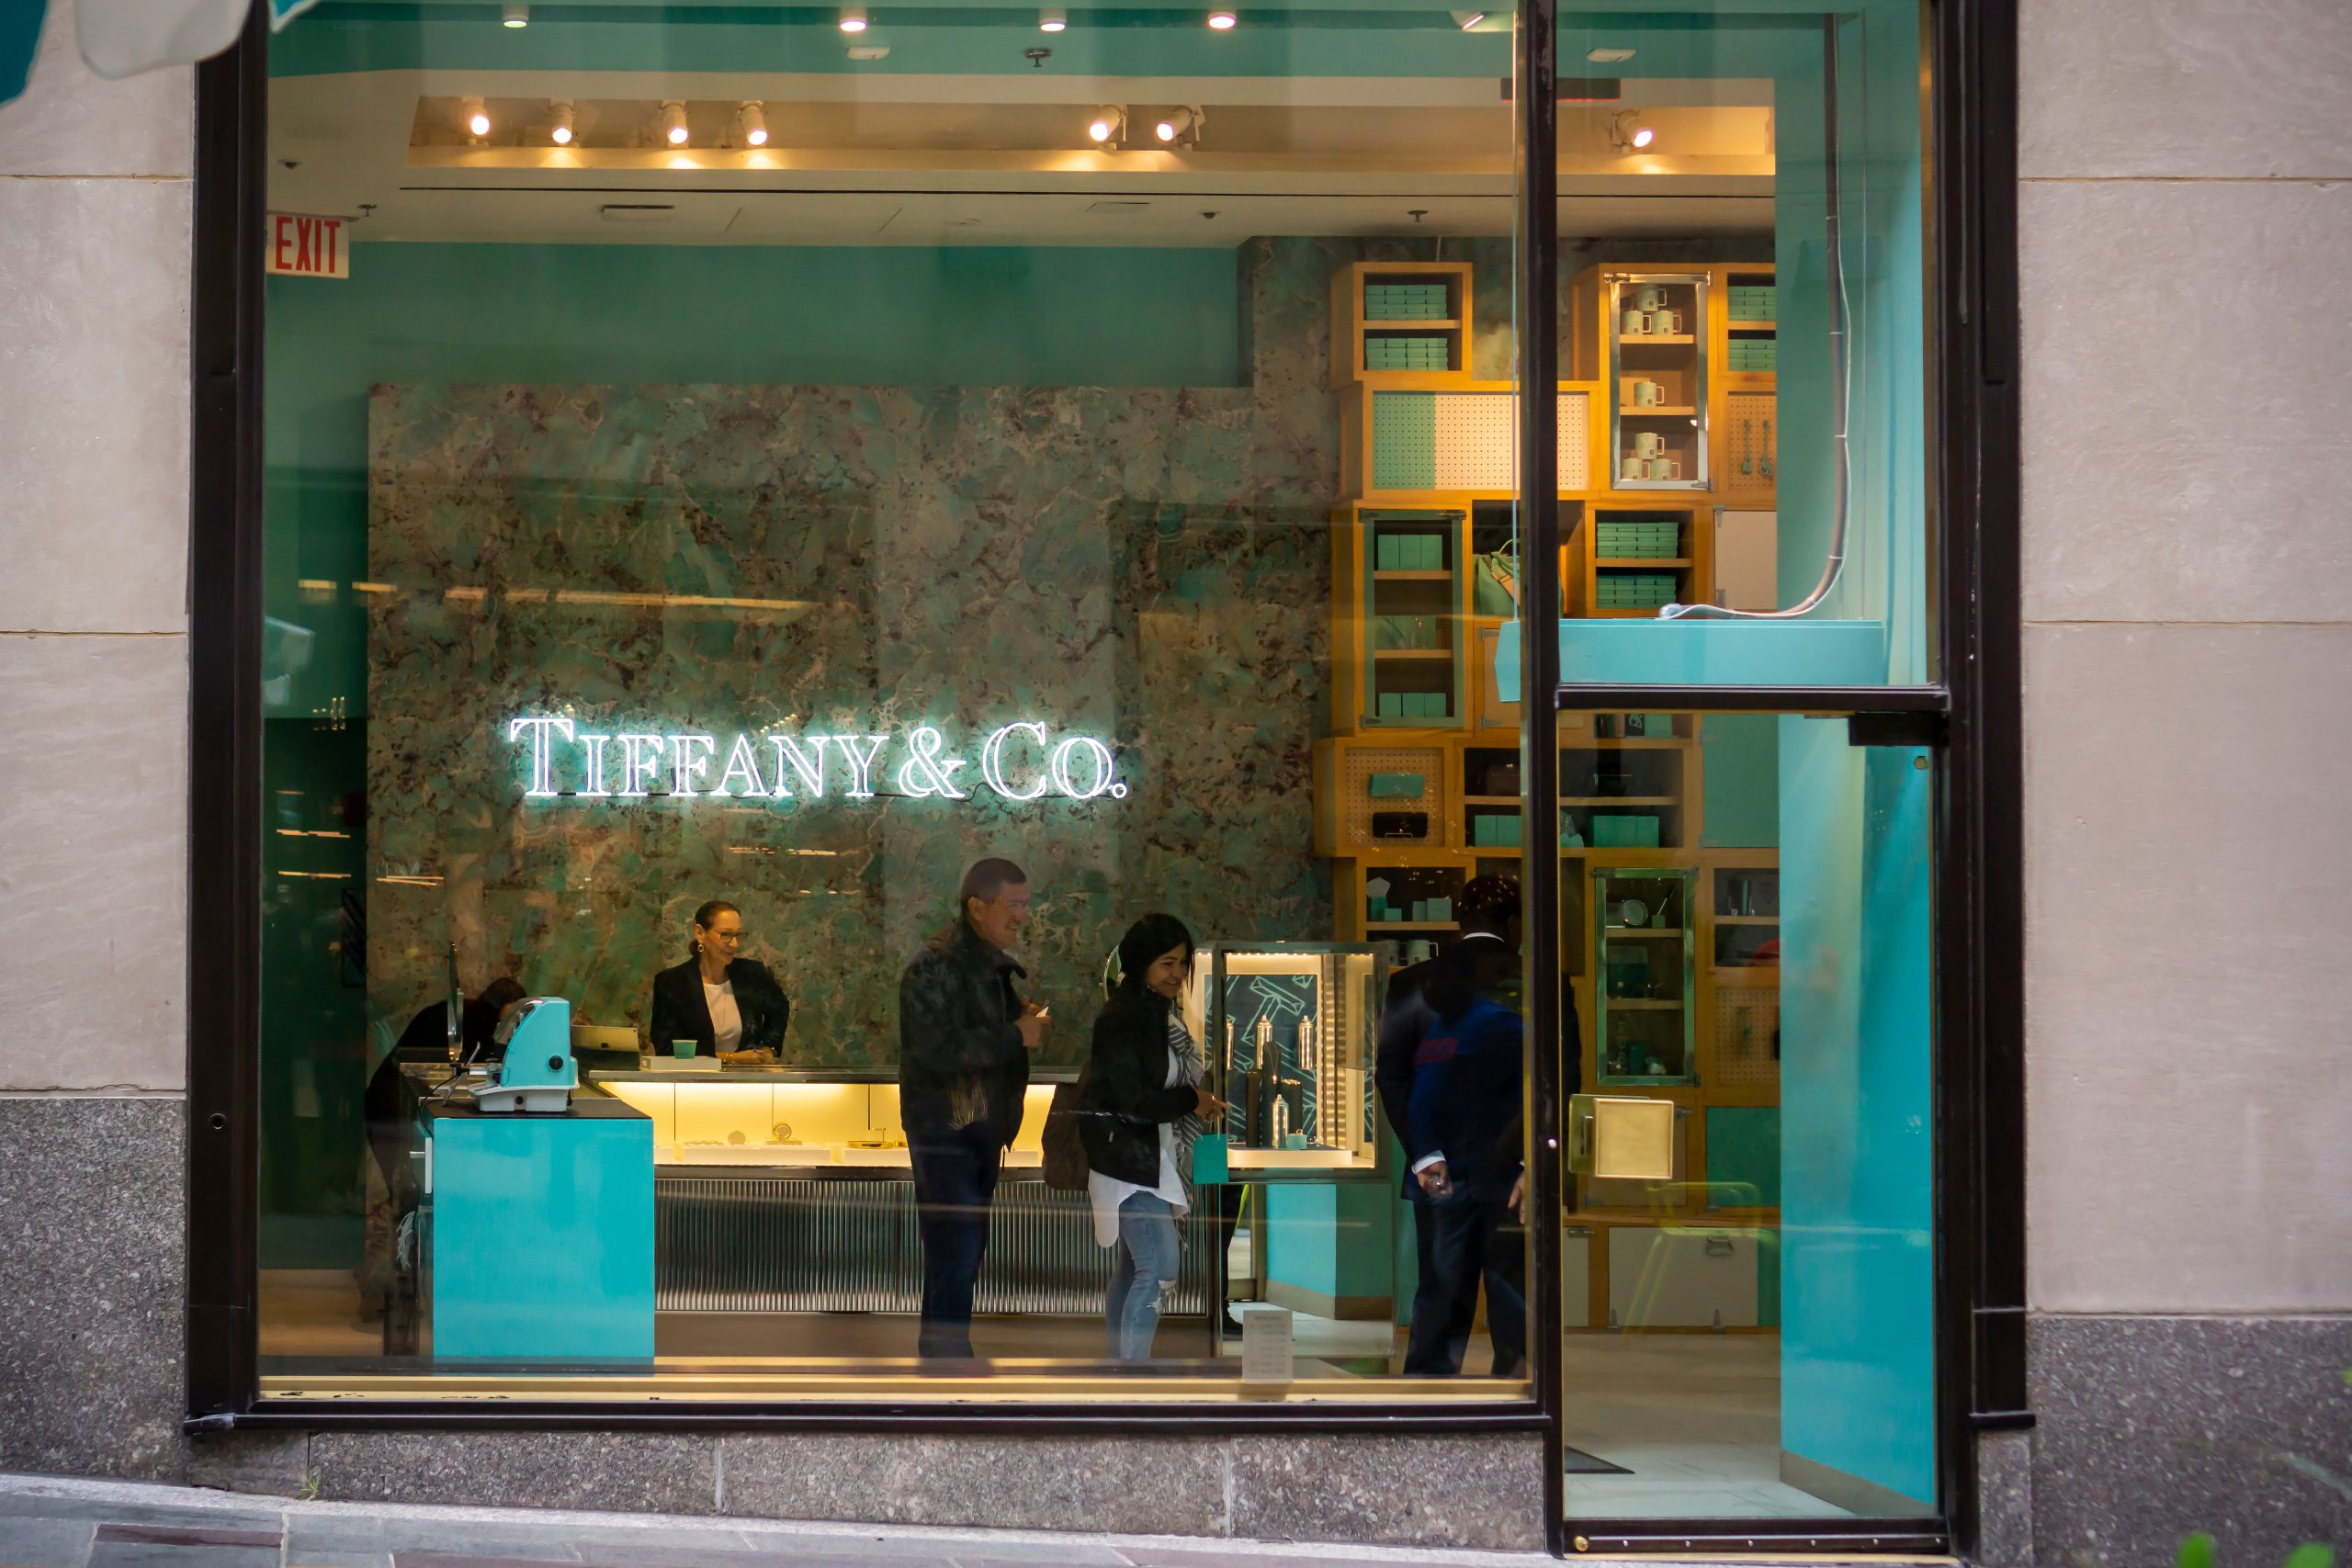 LVMH Welcomes Tiffany & Co. To The Family -- For $16.2 Billion